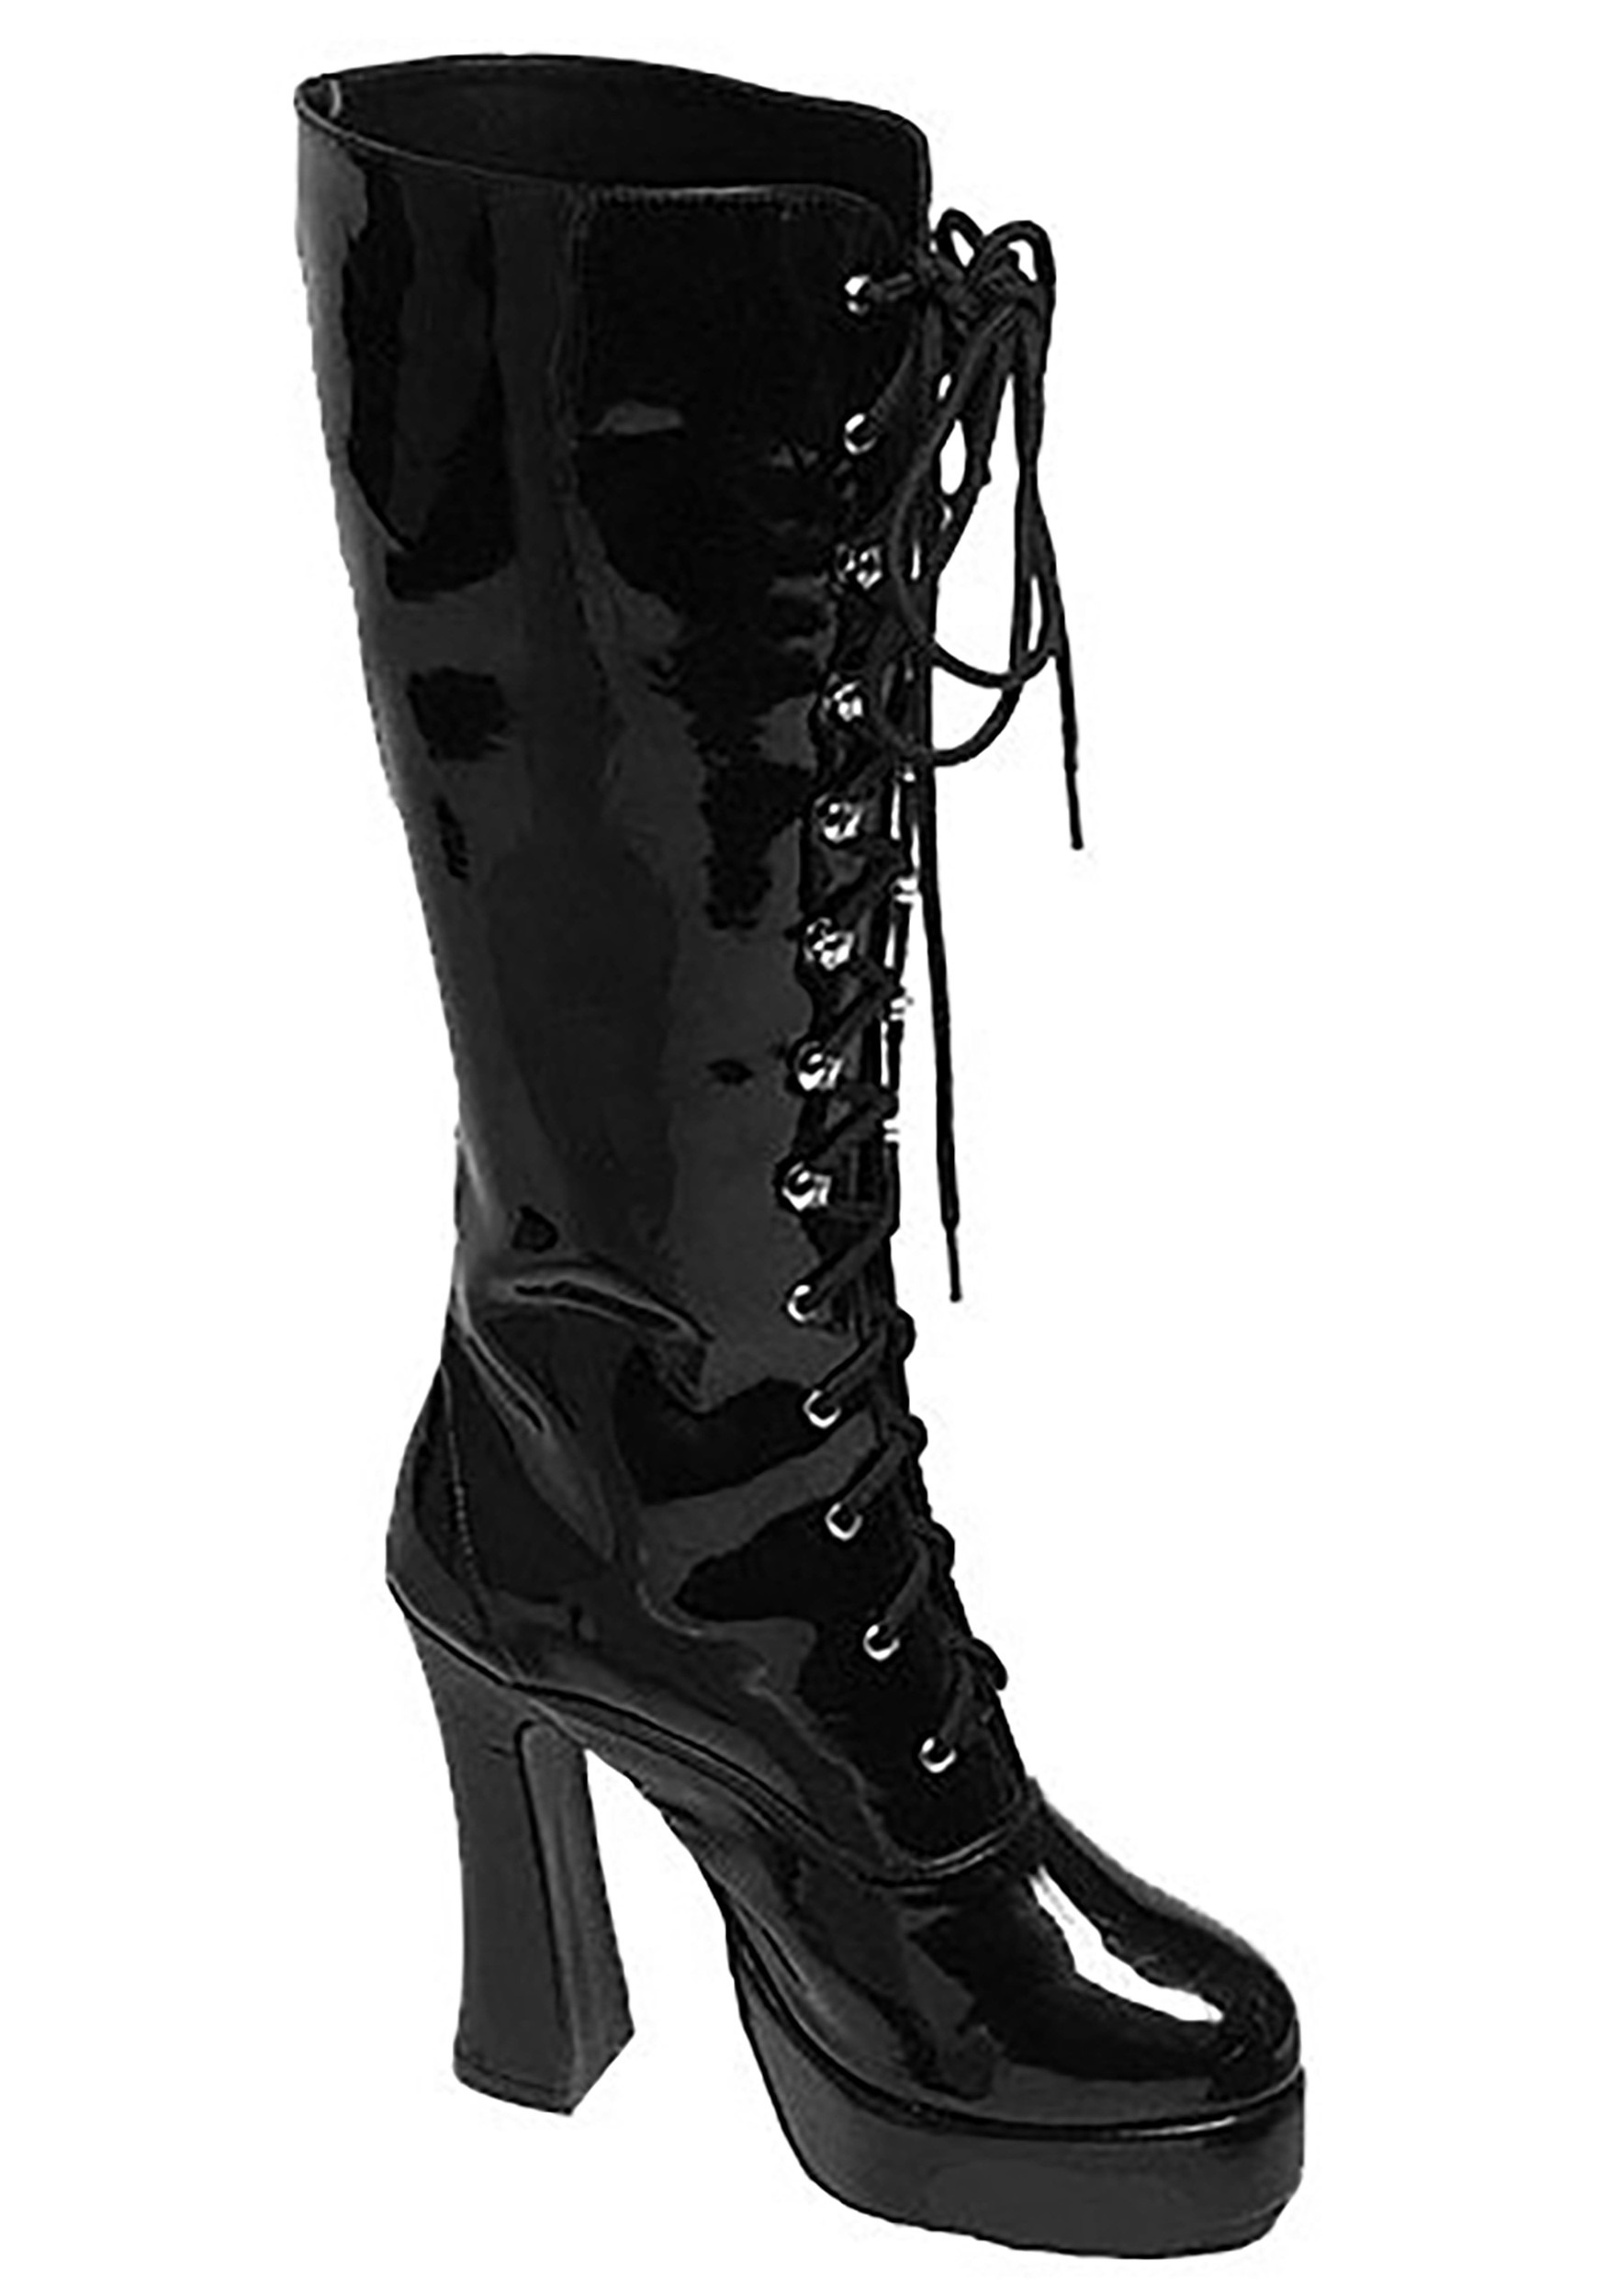 Sexy Black Faux Leather Knee High Boots 